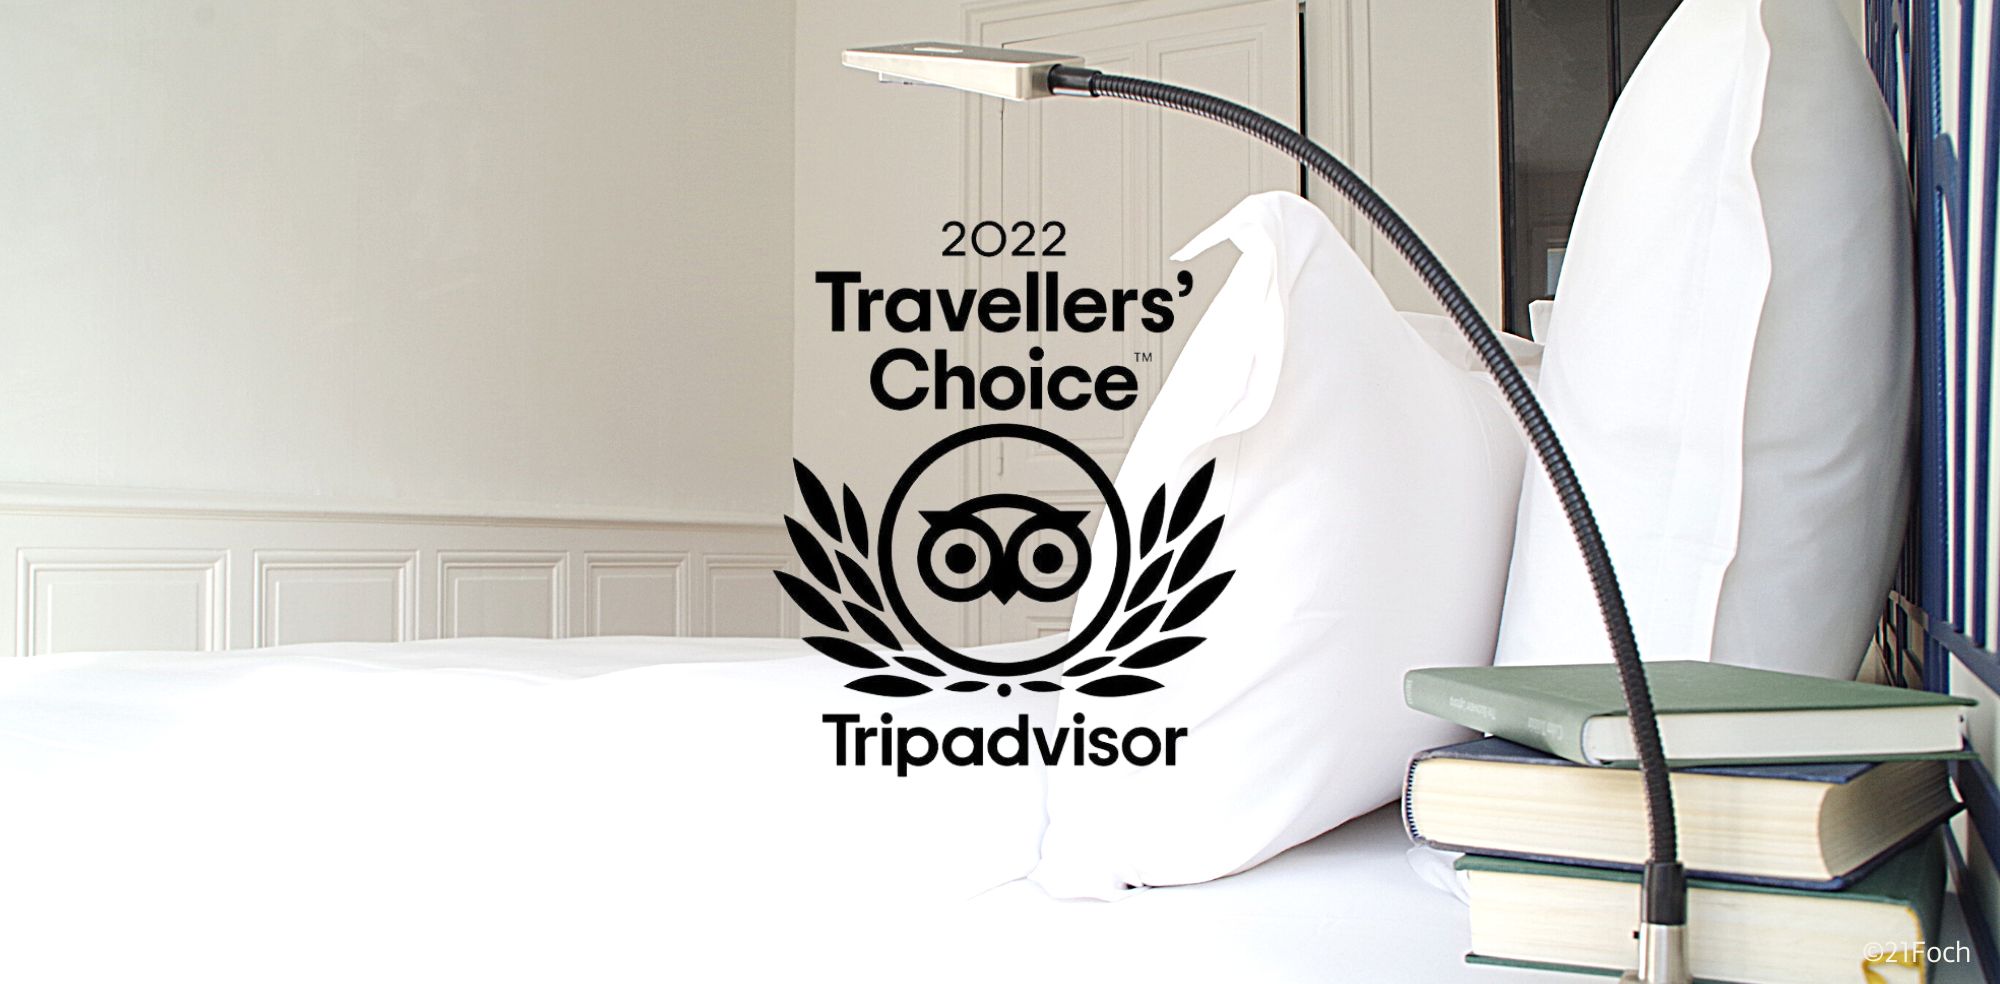 Still number 1 on TripAdvisor for 8 years<br/><a href='https://blog.21foch.fr/blog-le-blog-du-21-foch-toujours-n-1-sur-tripadvisor.asp' title='' target='_blank'>I WANT TO KNOW MORE ABOUT...</a>